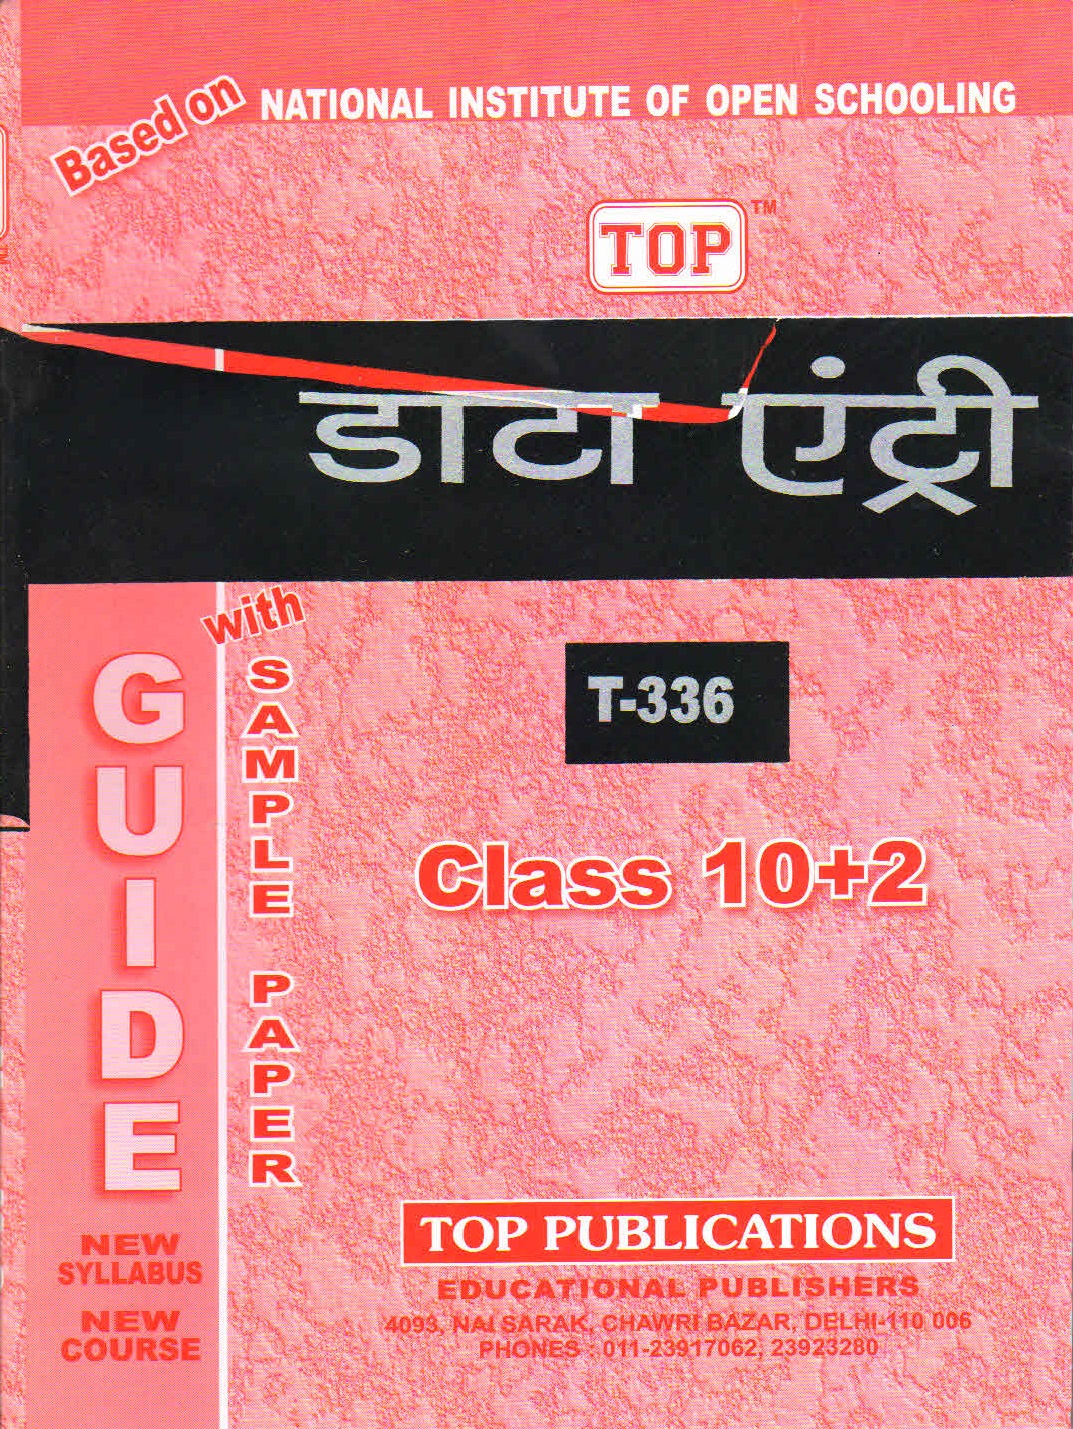 NIOS 336 Data Entry Operation (डाटा एंट्री) Guide Book for 12th Class